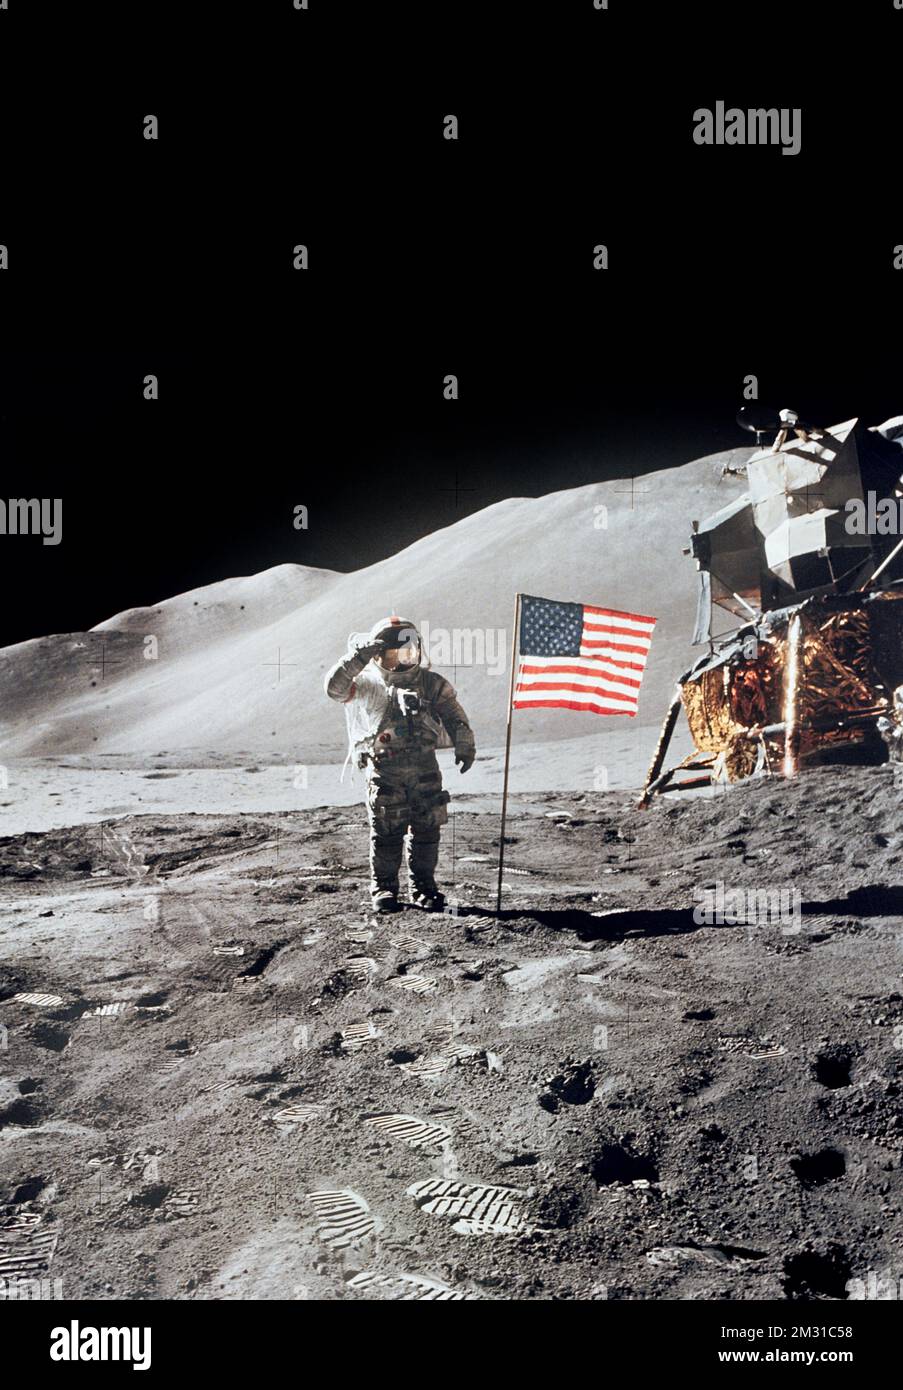 The Moon's surface. Astronaut David R. Scott gives a military salute while standing beside the deployed United States flag during the Apollo 15 lunar surface extravehicular activity (EVA) at the Hadley-Apennine landing site. The flag was deployed toward the end of EVA-2. The Lunar Module (LM), 'Falcon,' is partially visible on the right. Hadley Delta in the background rises c.4000m (about 13124ft) above the plain. This photograph was taken by astronaut James B. Irwin, lunar module pilot.  A unique optimised version of a NASA image. Credit: JB Irwin/NASA Stock Photo